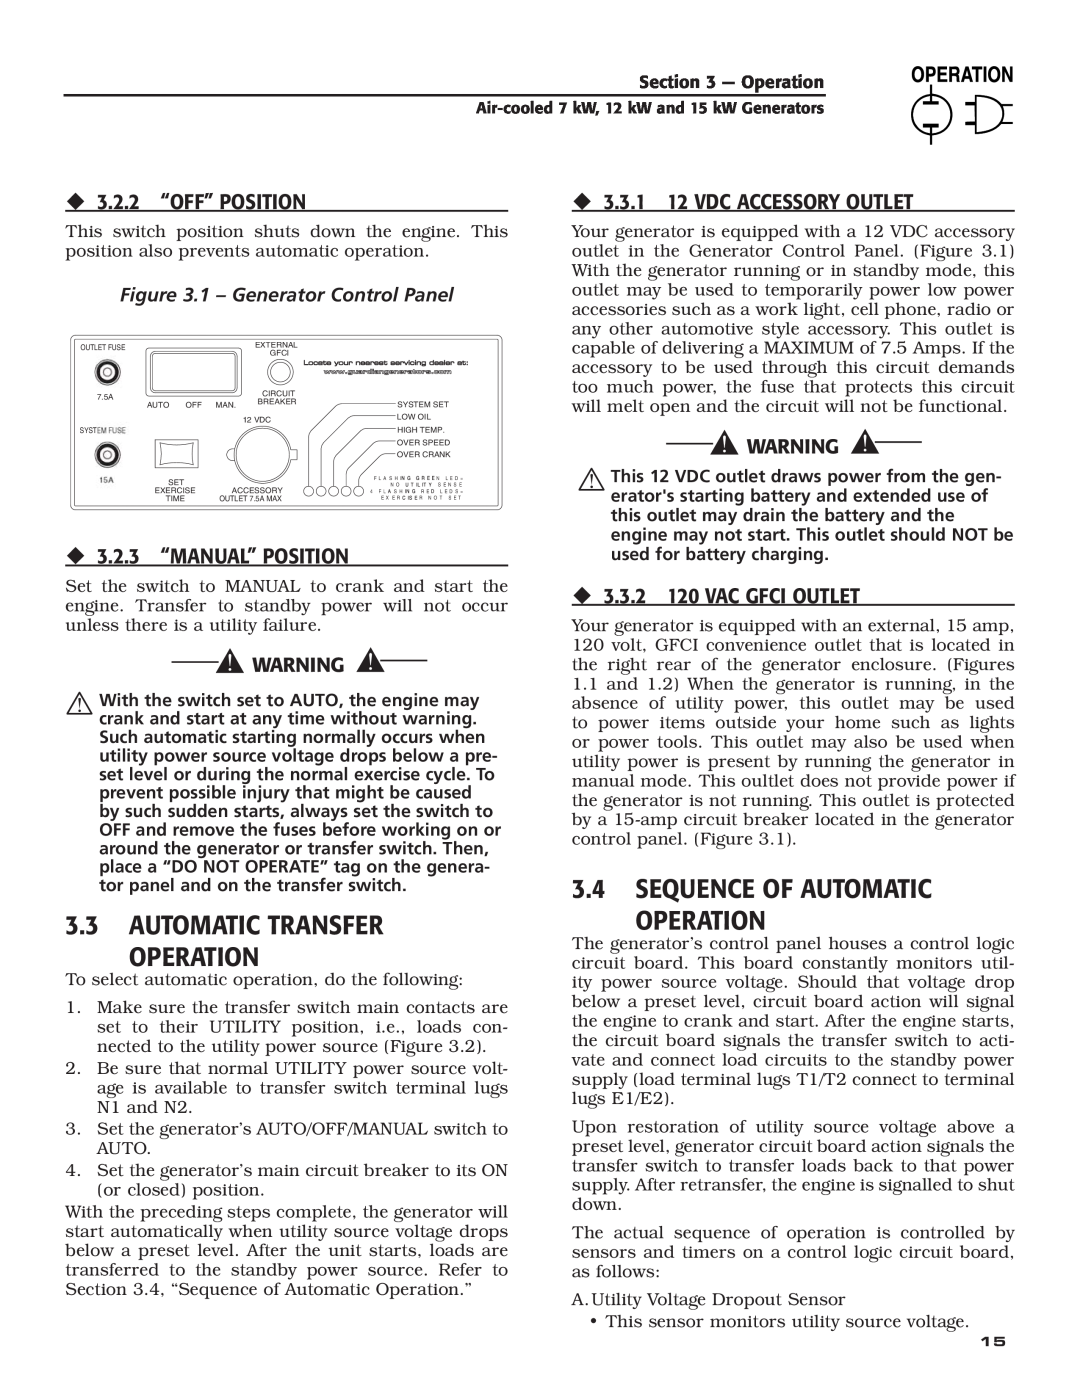 Generac Power Systems 04389-3, 04456-3, 04390-3 owner manual Automatic Transfer Operation, Sequence Of Automatic Operation 